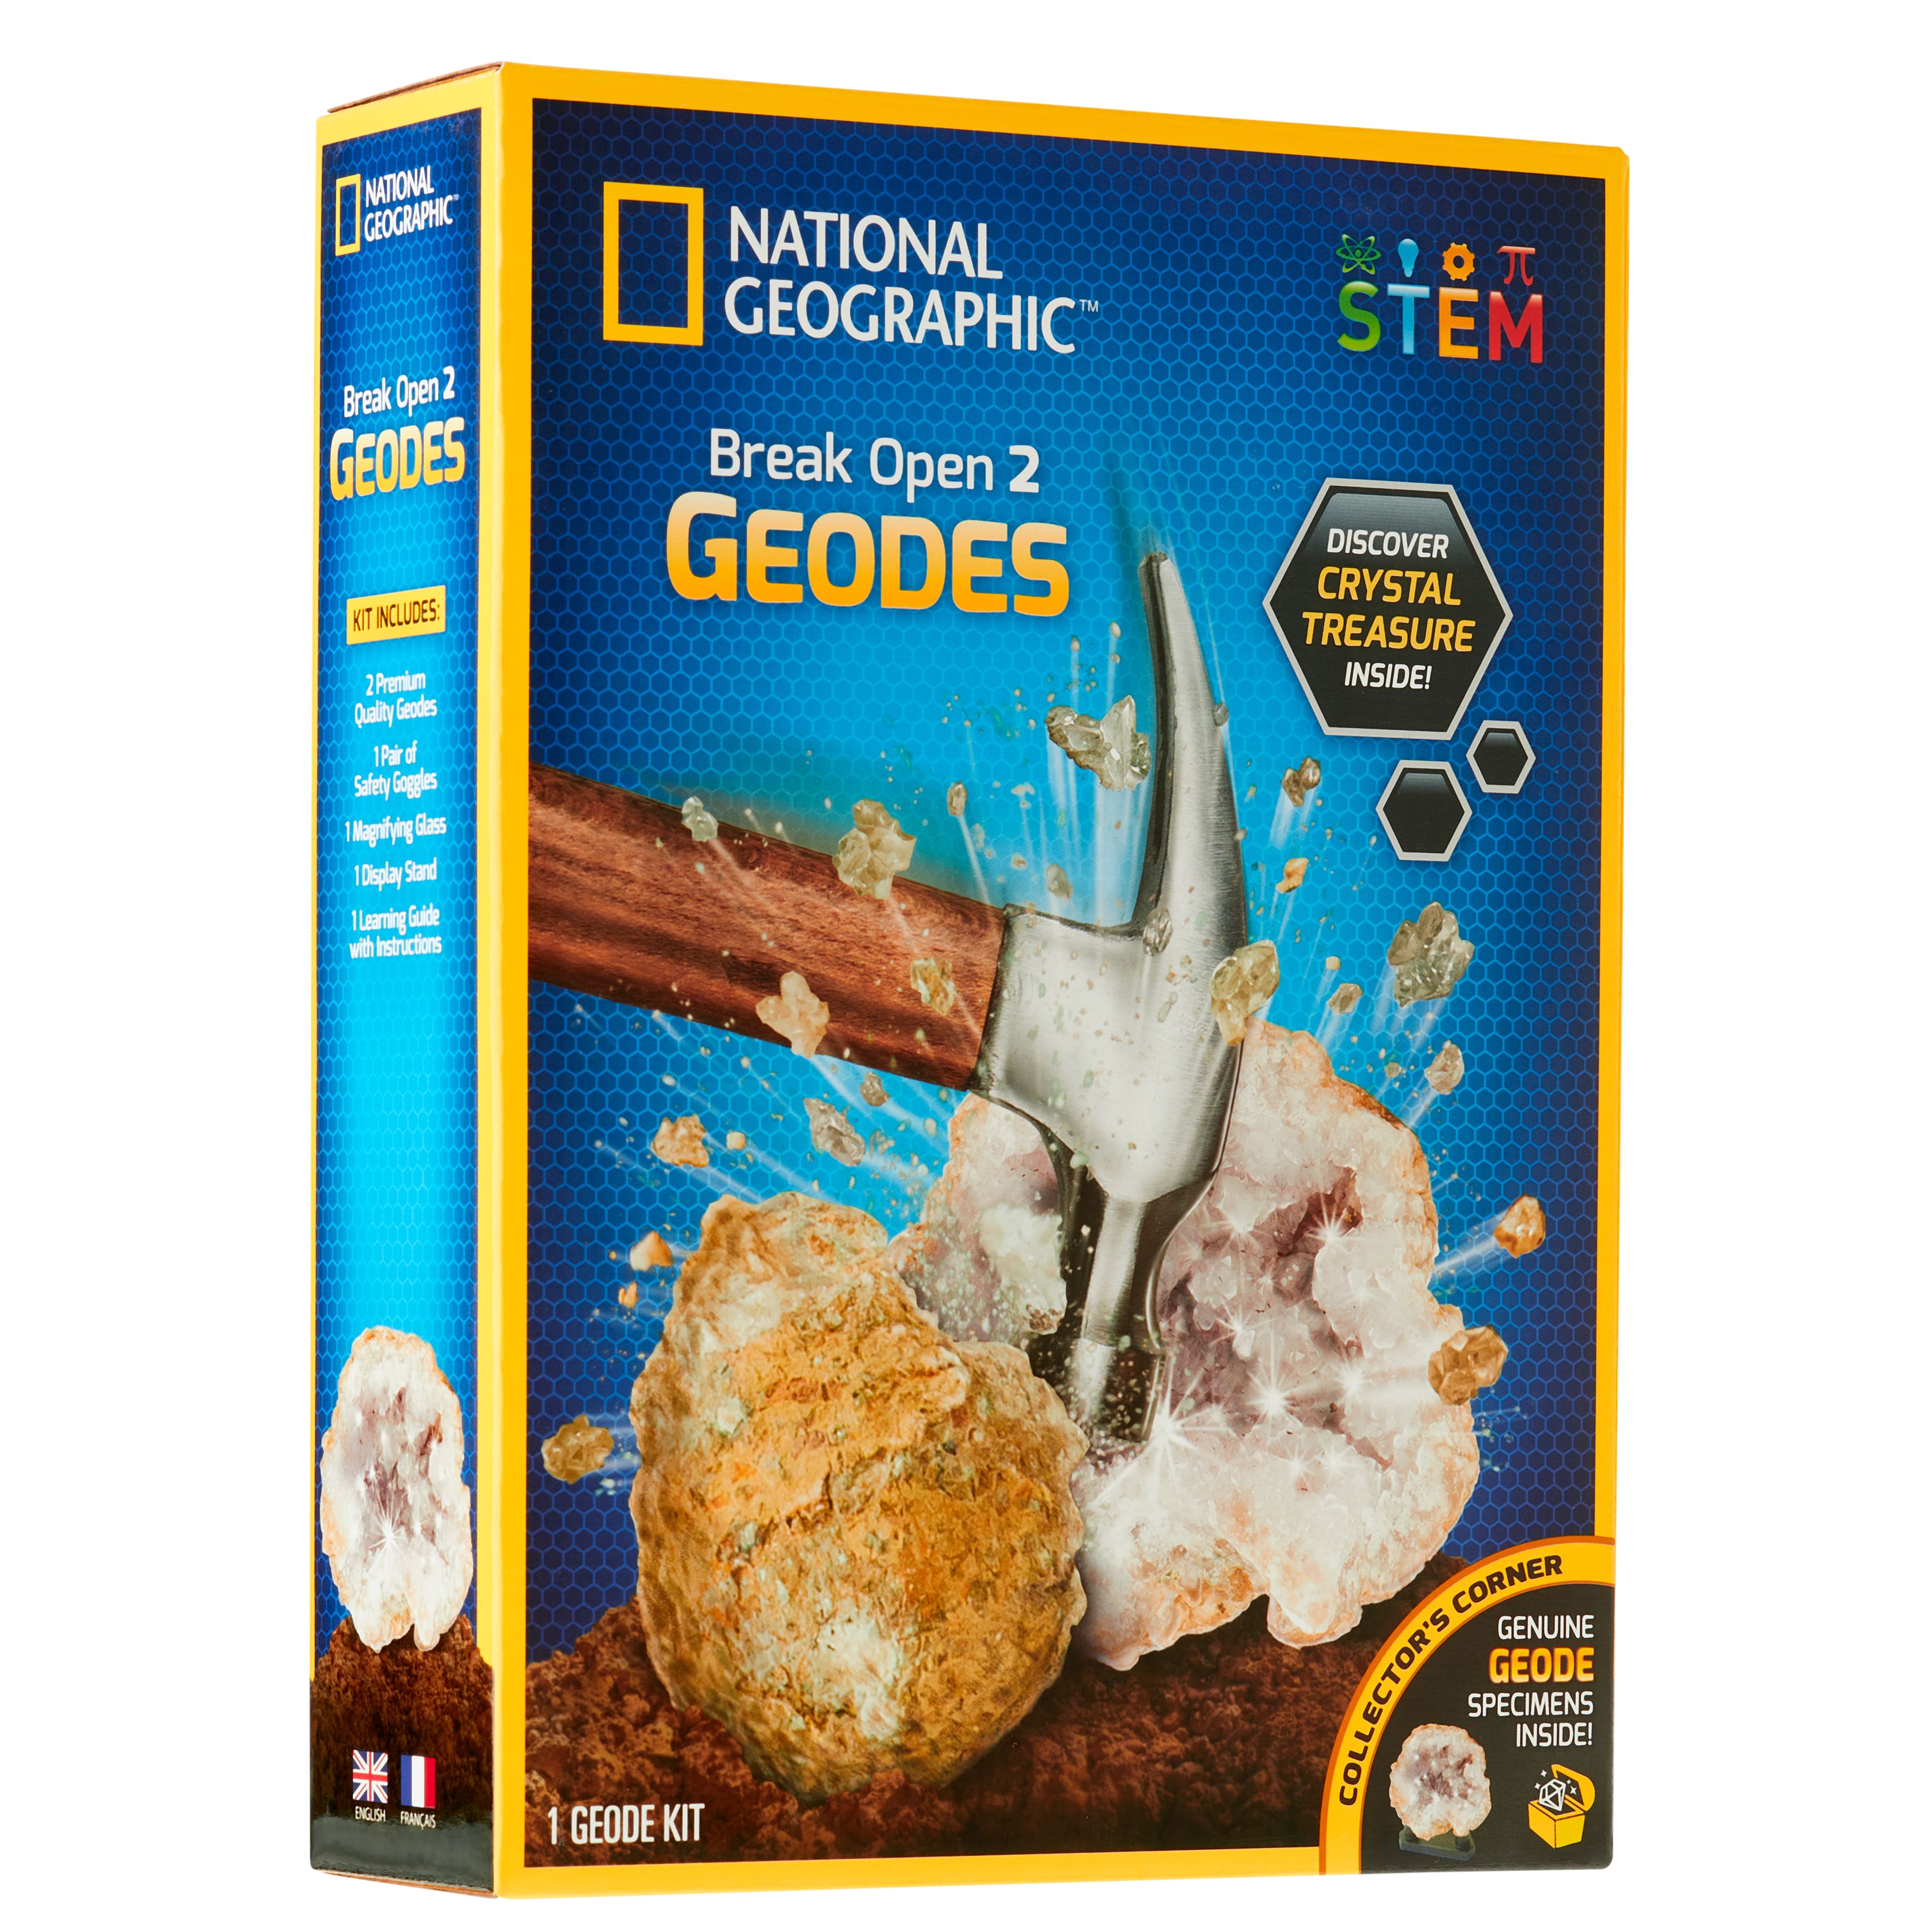 national geographic geology bundle - 3 rock, fossil and crystal kits, grow  crystals, start a rock, mineral, & fossil collection, & dig up 15 real  gemstones, great stem science kit 